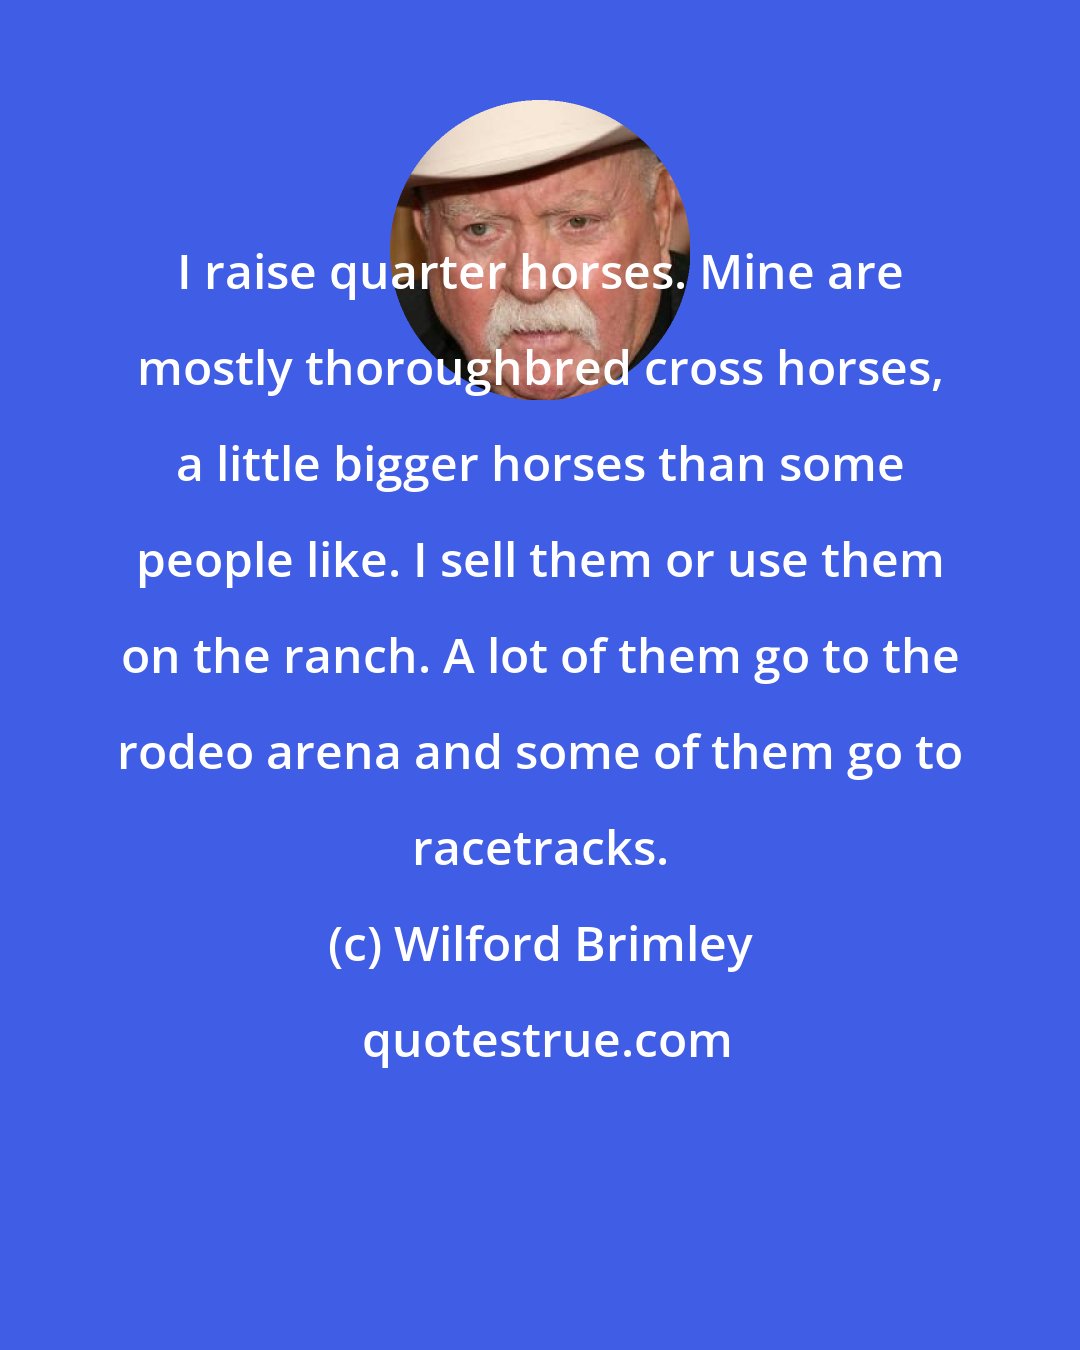 Wilford Brimley: I raise quarter horses. Mine are mostly thoroughbred cross horses, a little bigger horses than some people like. I sell them or use them on the ranch. A lot of them go to the rodeo arena and some of them go to racetracks.